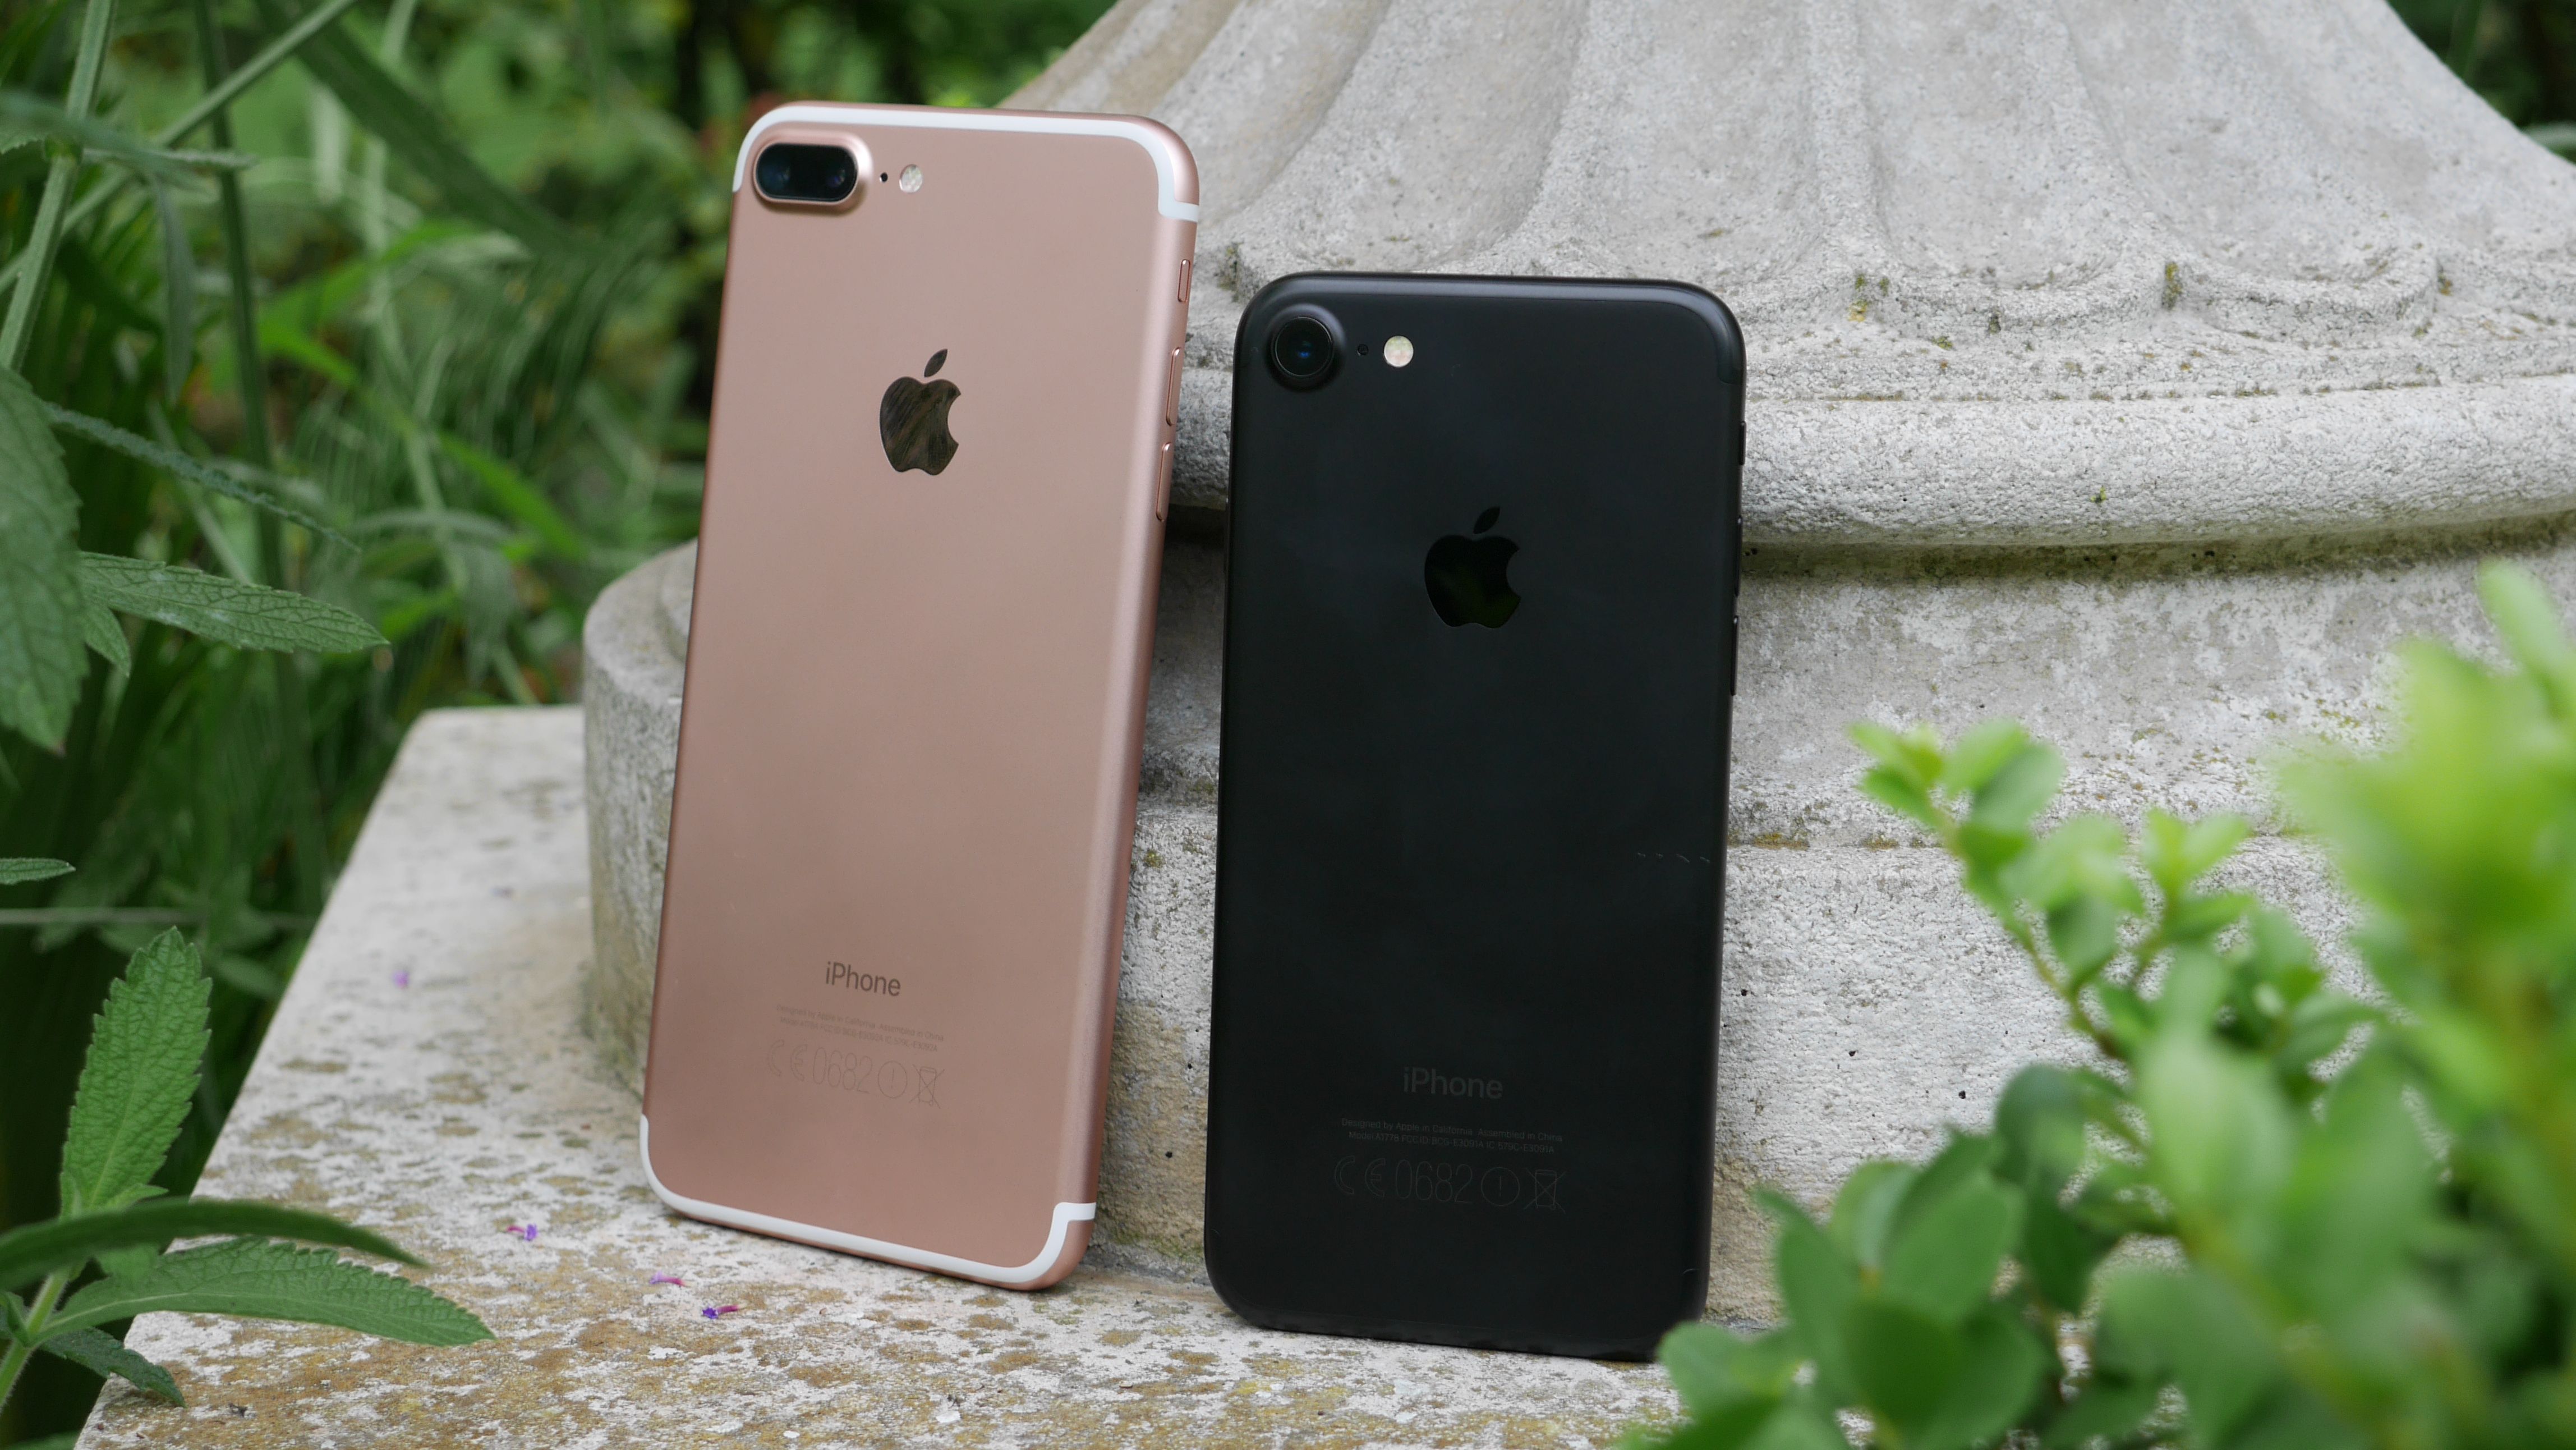 Iphone 7 Vs Iphone 7 Plus What S The Difference And Which Is Best For Me